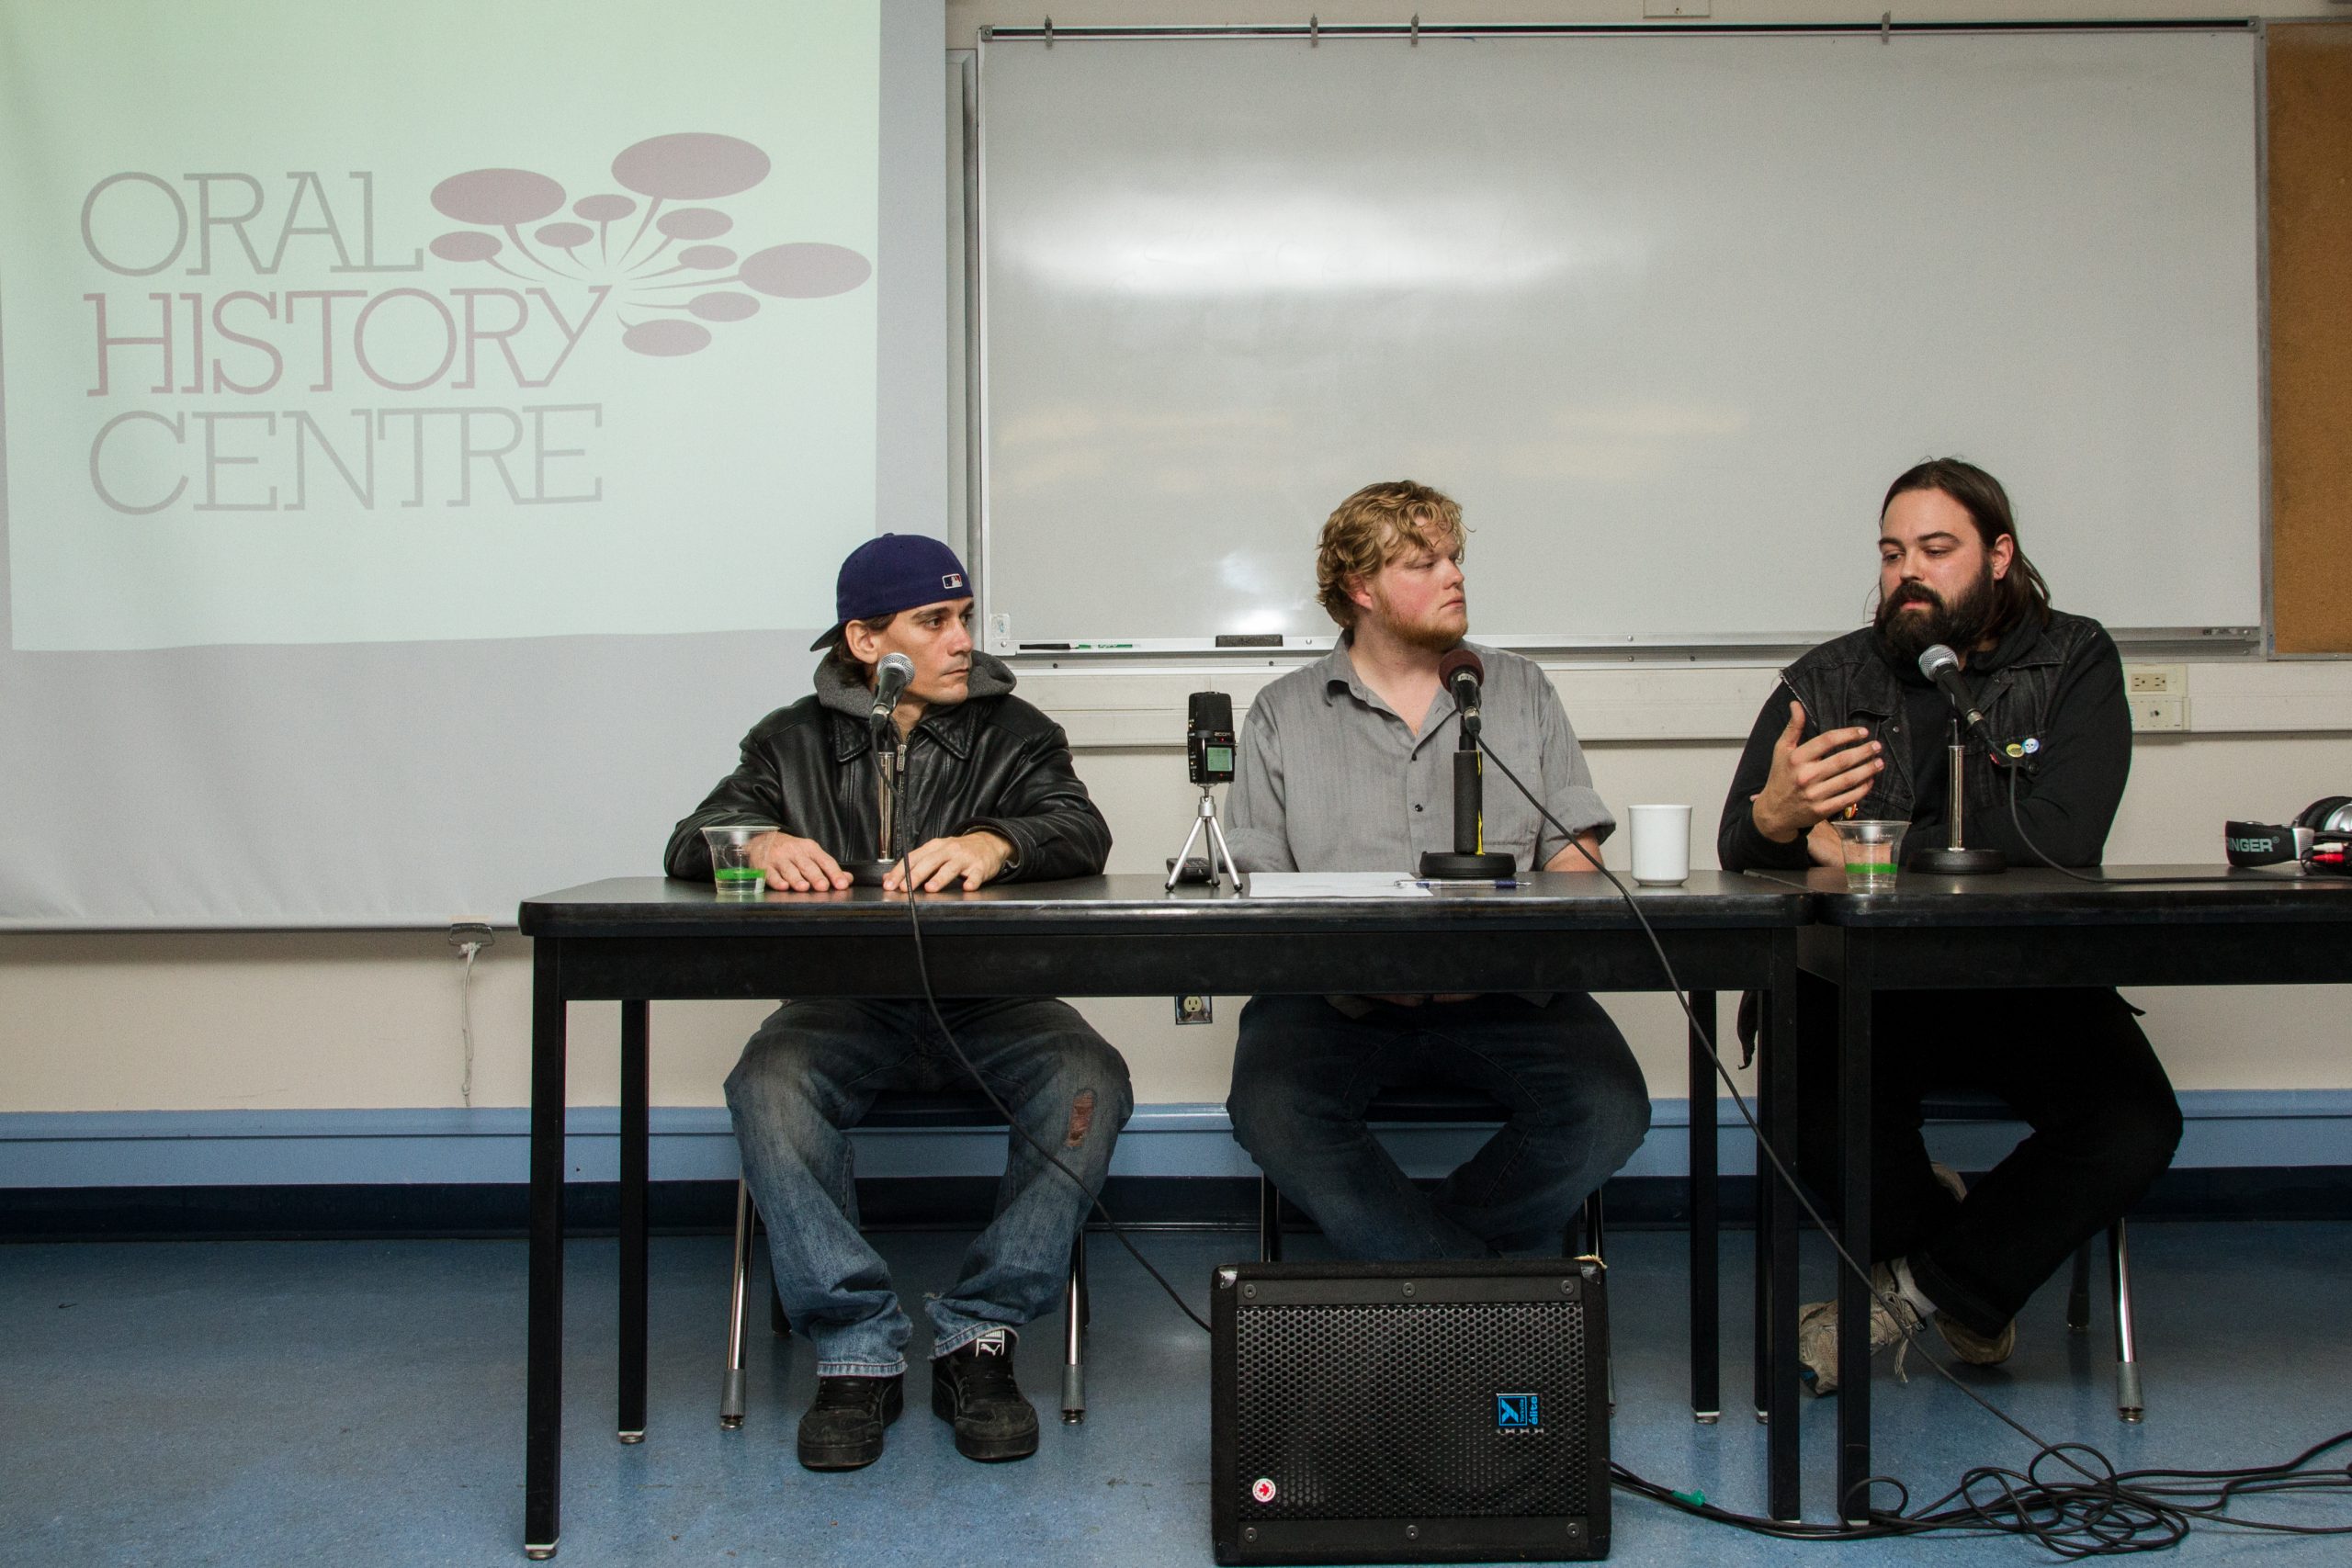 Colour photo of three men at event table with three microphones. Oral History Centre logo is projected behind them.